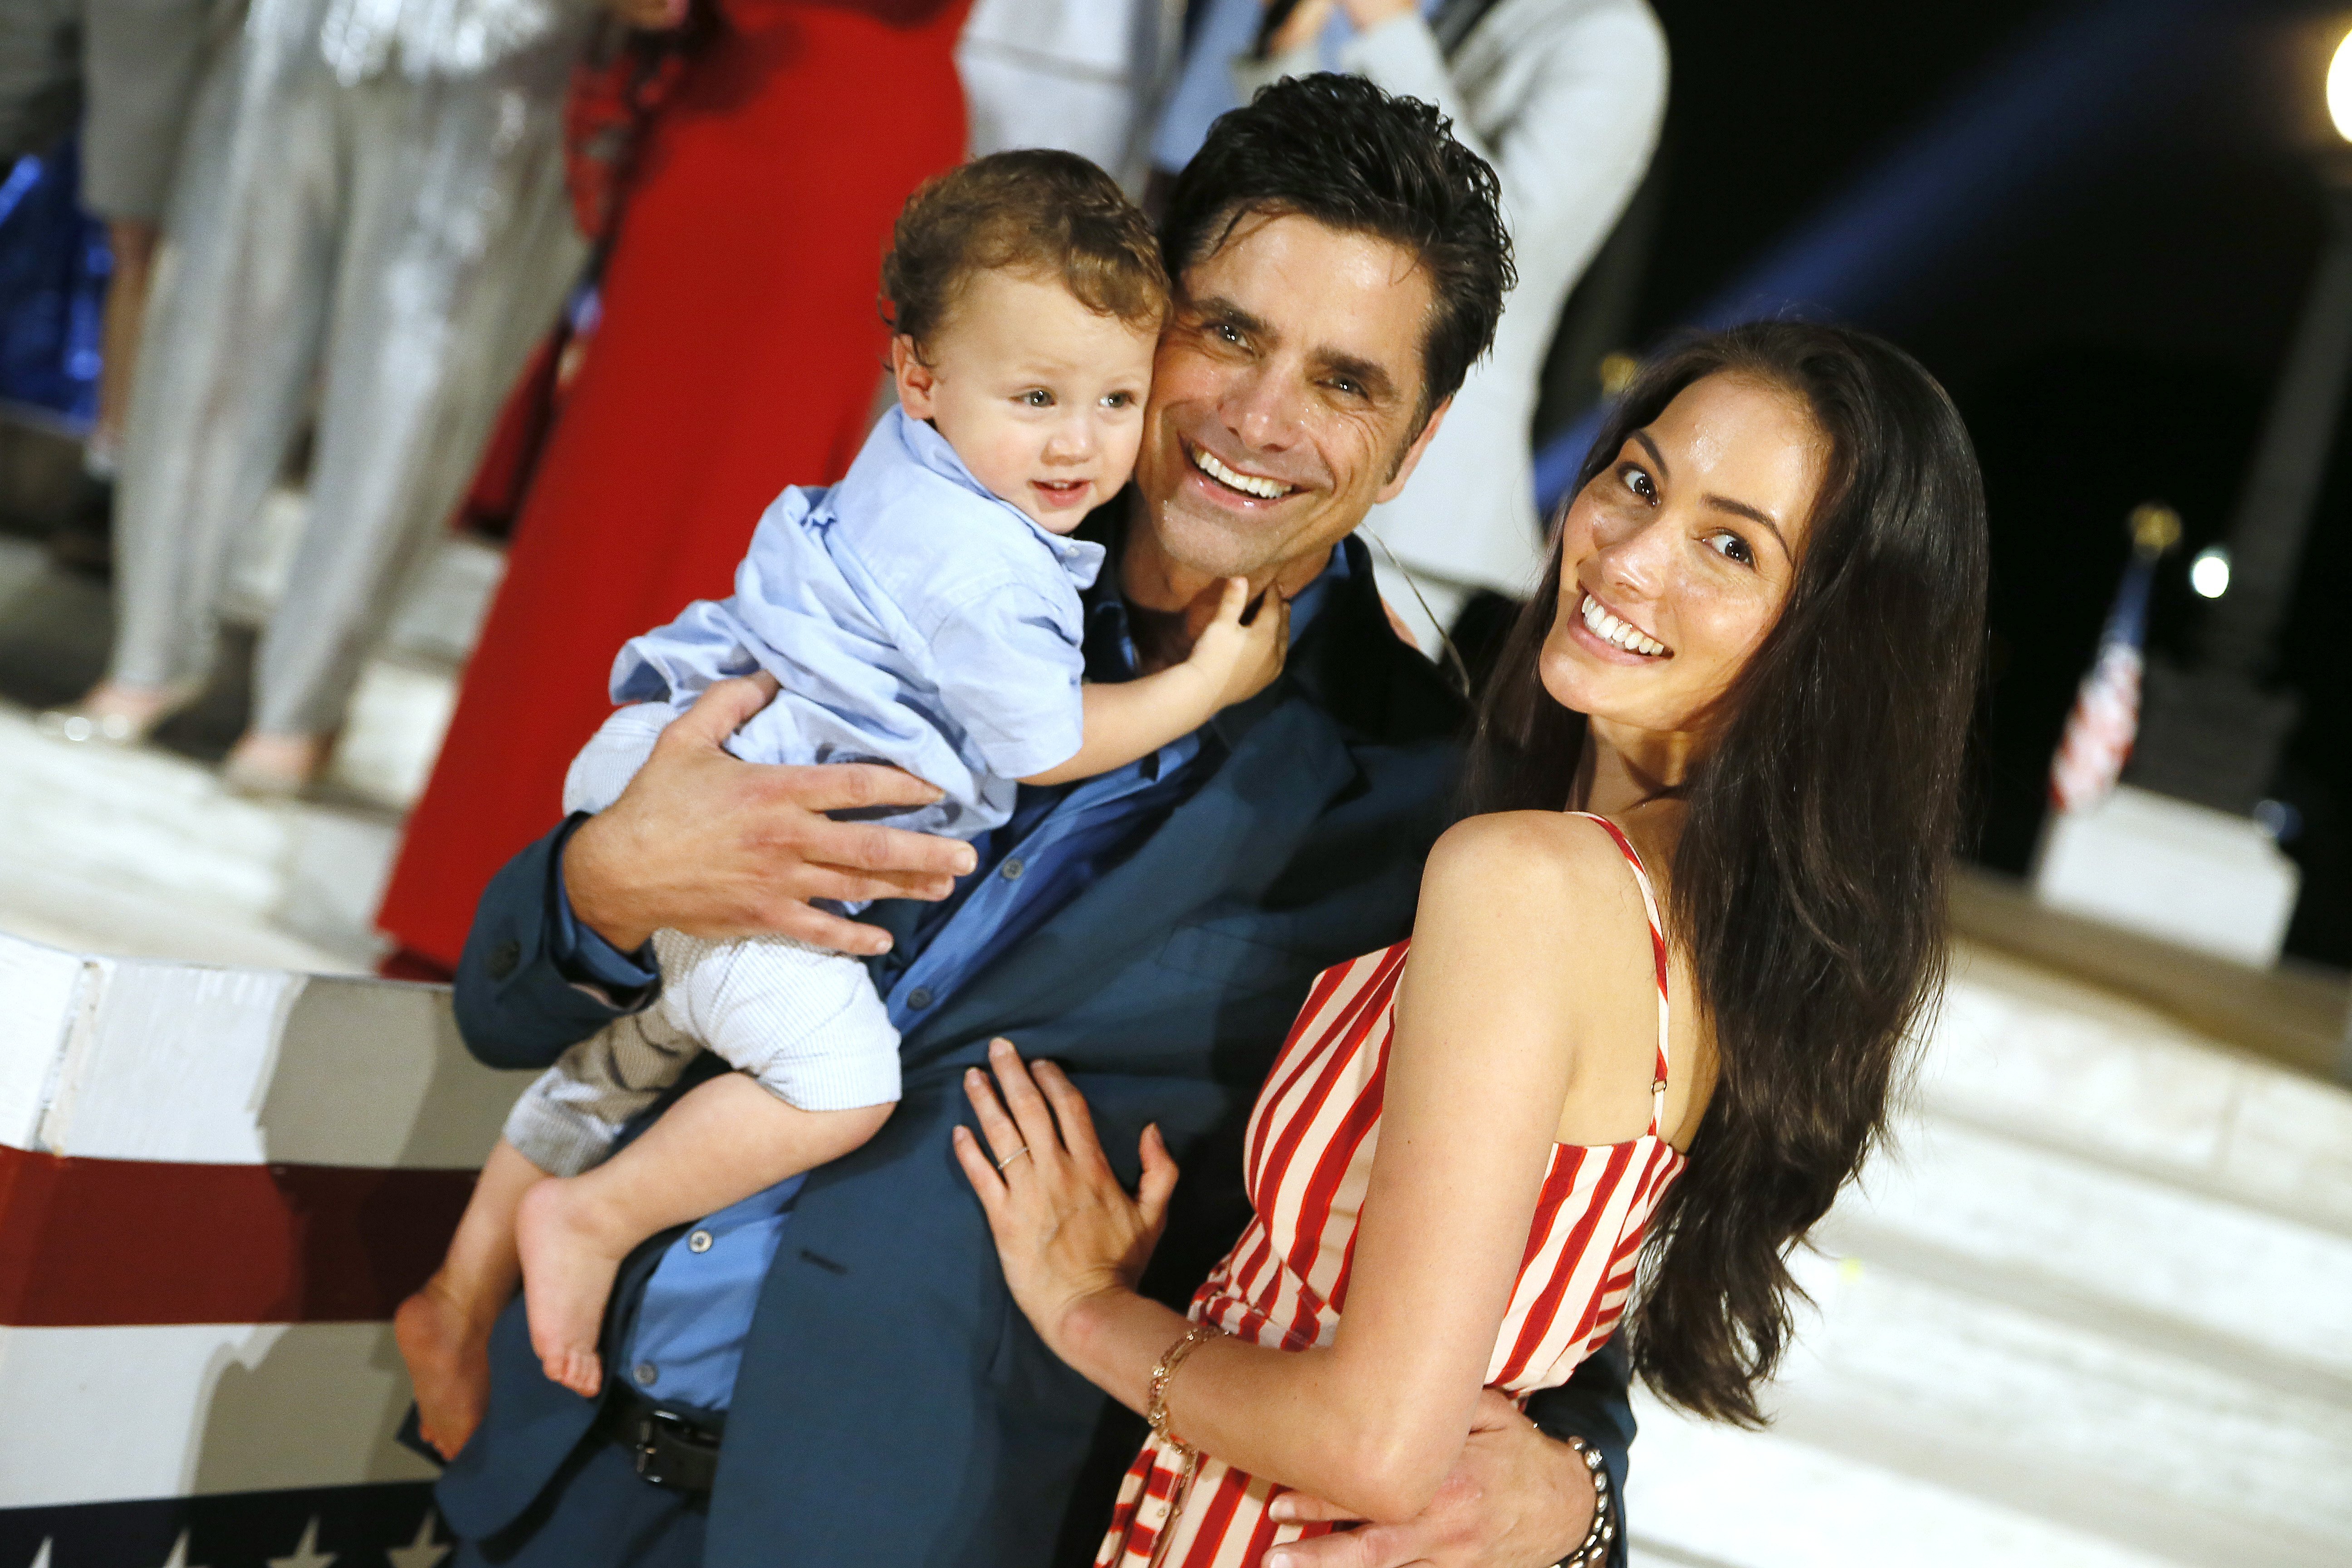 John Stamos with his son Billy Stamos and wife Caitlin McHugh at U.S. Capitol, West Lawn on July 04, 2019| Photo: Getty images